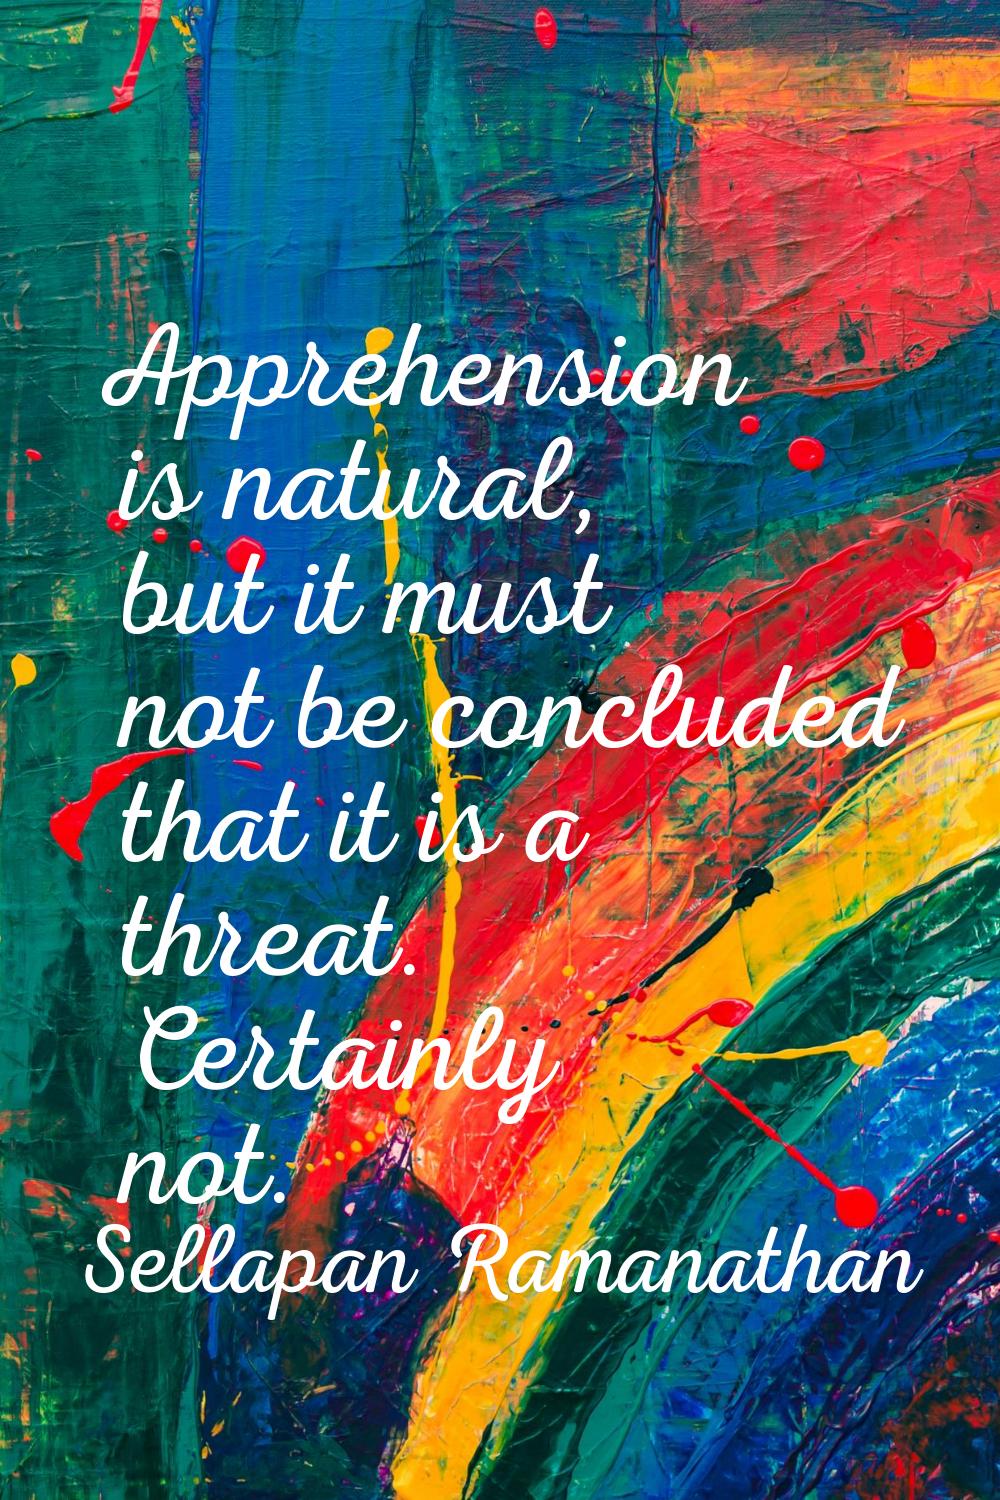 Apprehension is natural, but it must not be concluded that it is a threat. Certainly not.